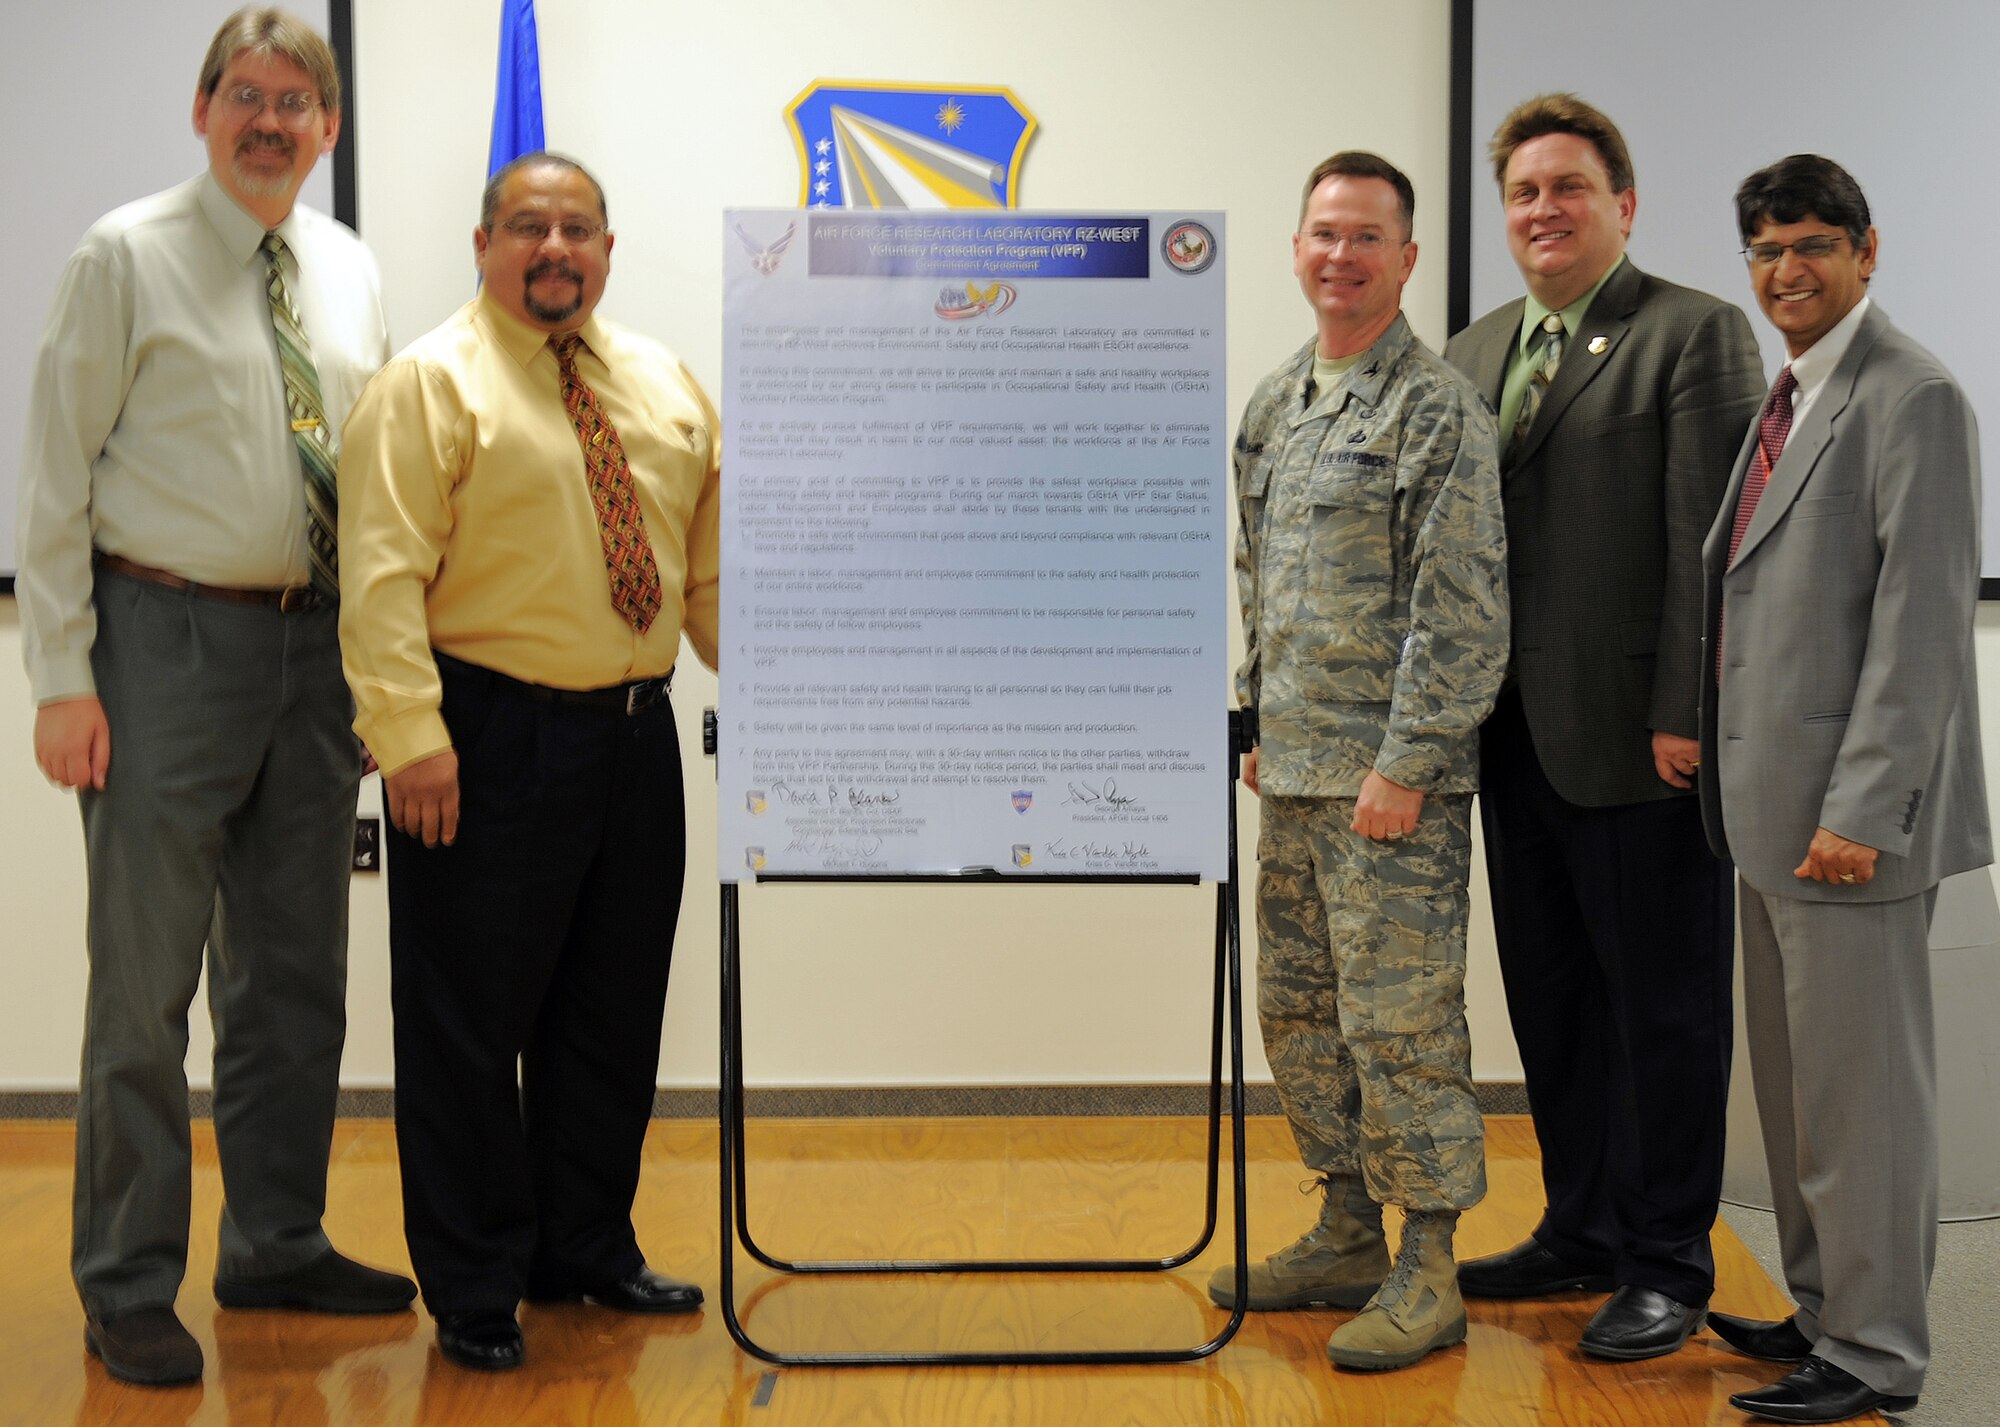 From left to right: Kris Vanderhyde, Air Force Research Laboratory Integration and Operations division, Mike Huggins, AFRL site director, George Amaya, American Federation of Government Employees Local 1406 president, Col. David Blanks, AFRL Detachment 7 commander and Dr. Ashwani Vij, Voluntary Protection Plan program lead, pose for a photo after signing a VPP commitment agreement Nov. 10. The VPP promotes work site safety and health. In the VPP, management, labor and Occupational Safety and Health Administration establish cooperative relationships at workplaces that have implemented a comprehensive safety and health management system. (Air Force photo/Ronald Fair)